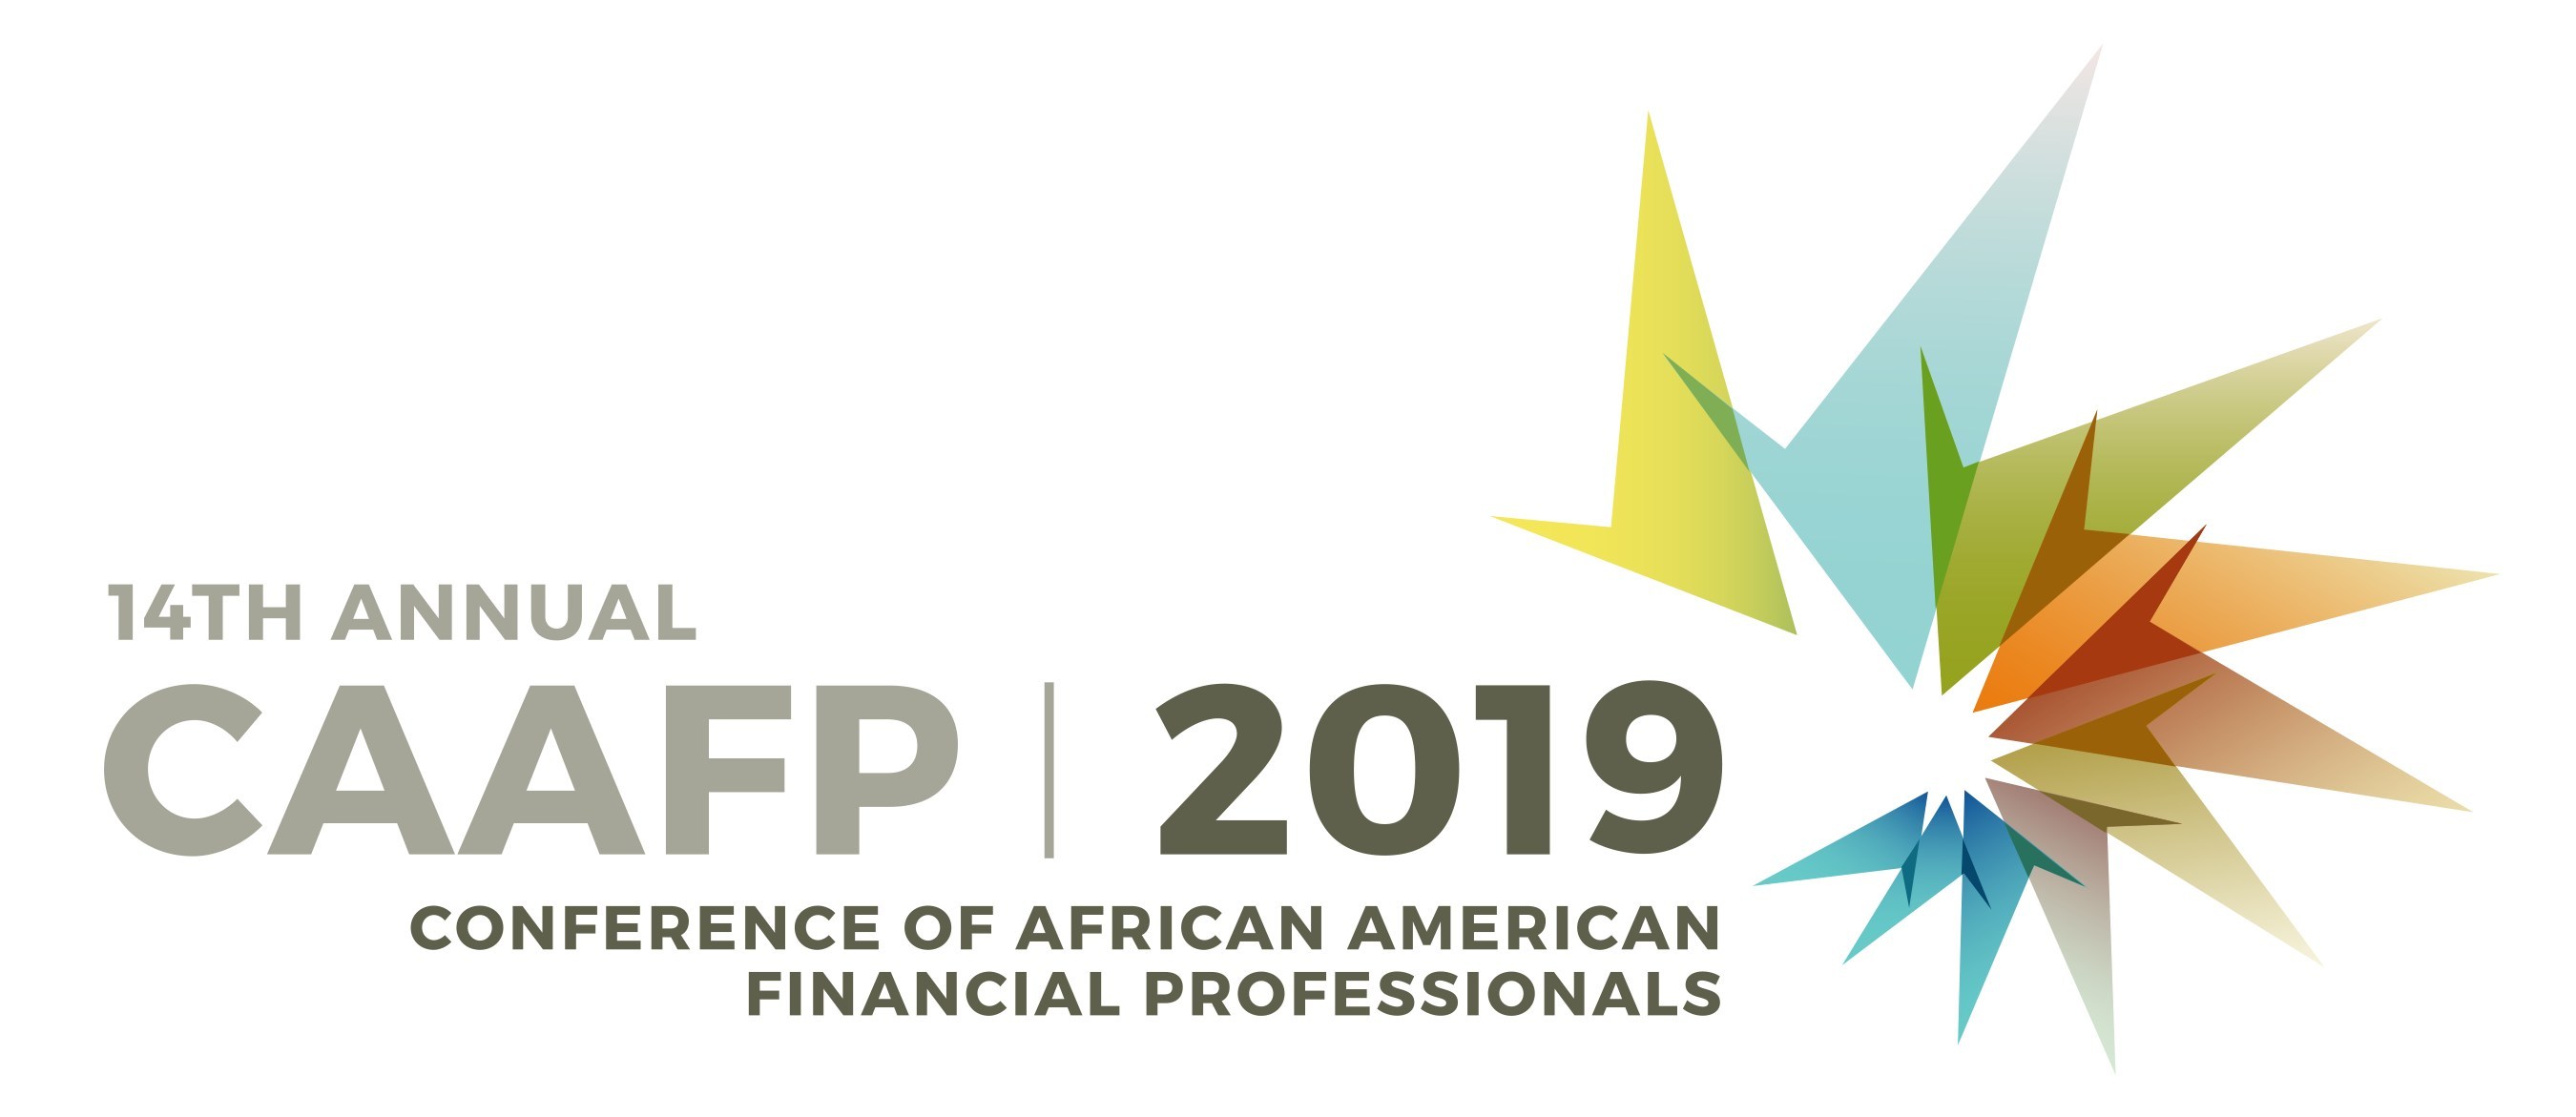 The American College of Financial Services to Host 14th Annual National Conference of African American Financial Professionals